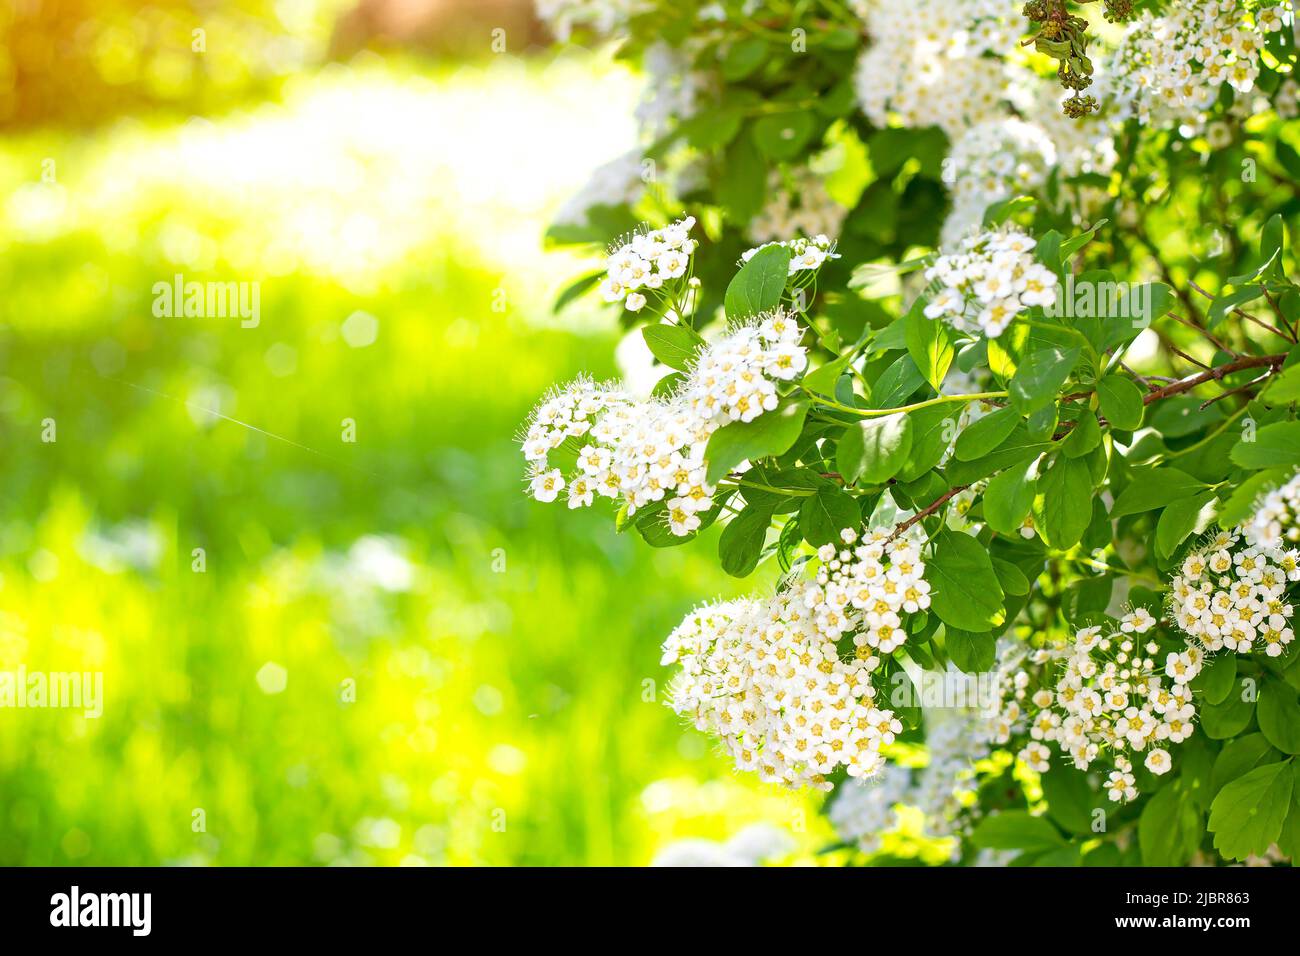 Many white Spirea (Spiraea Vanhouttei Briot Zabel Gold Fountain) flowers with green leaves in spring in the garden with copy space. Stock Photo